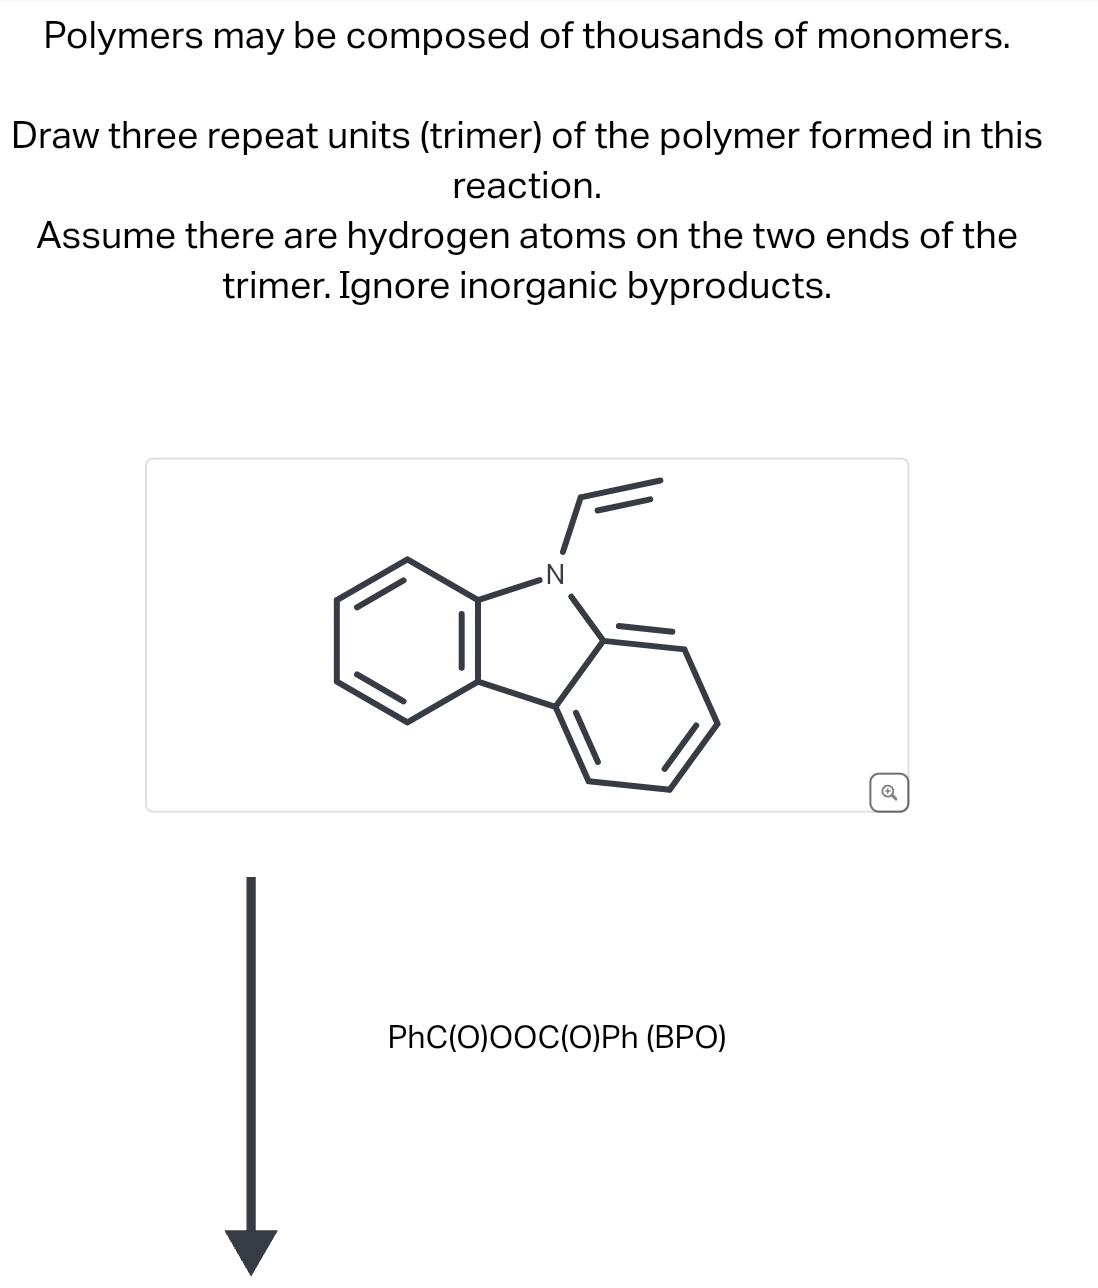 Polymers may be composed of thousands of monomers.
Draw three repeat units (trimer) of the polymer formed in this
reaction.
Assume there are hydrogen atoms on the two ends of the
trimer. Ignore inorganic byproducts.
PhC(O)OOC(O)Ph (BPO)
Q